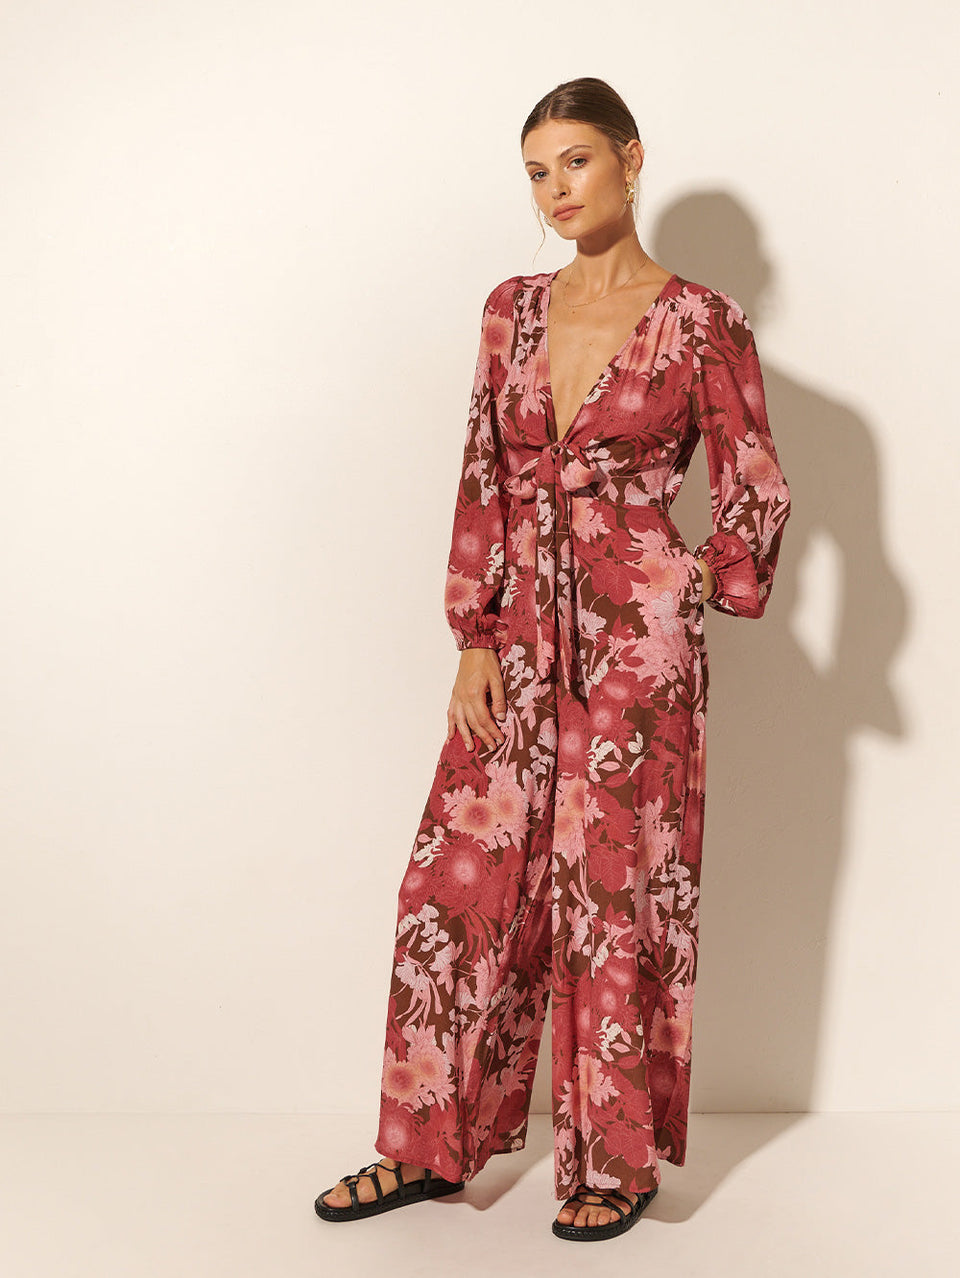 Studio model wears KIVARI Hacienda Jumpsuit: A red, pink and brown floral jumpsuit with ribbon tie front and long sleeves, crafted from sustainable LENZING Viscose Crepe.